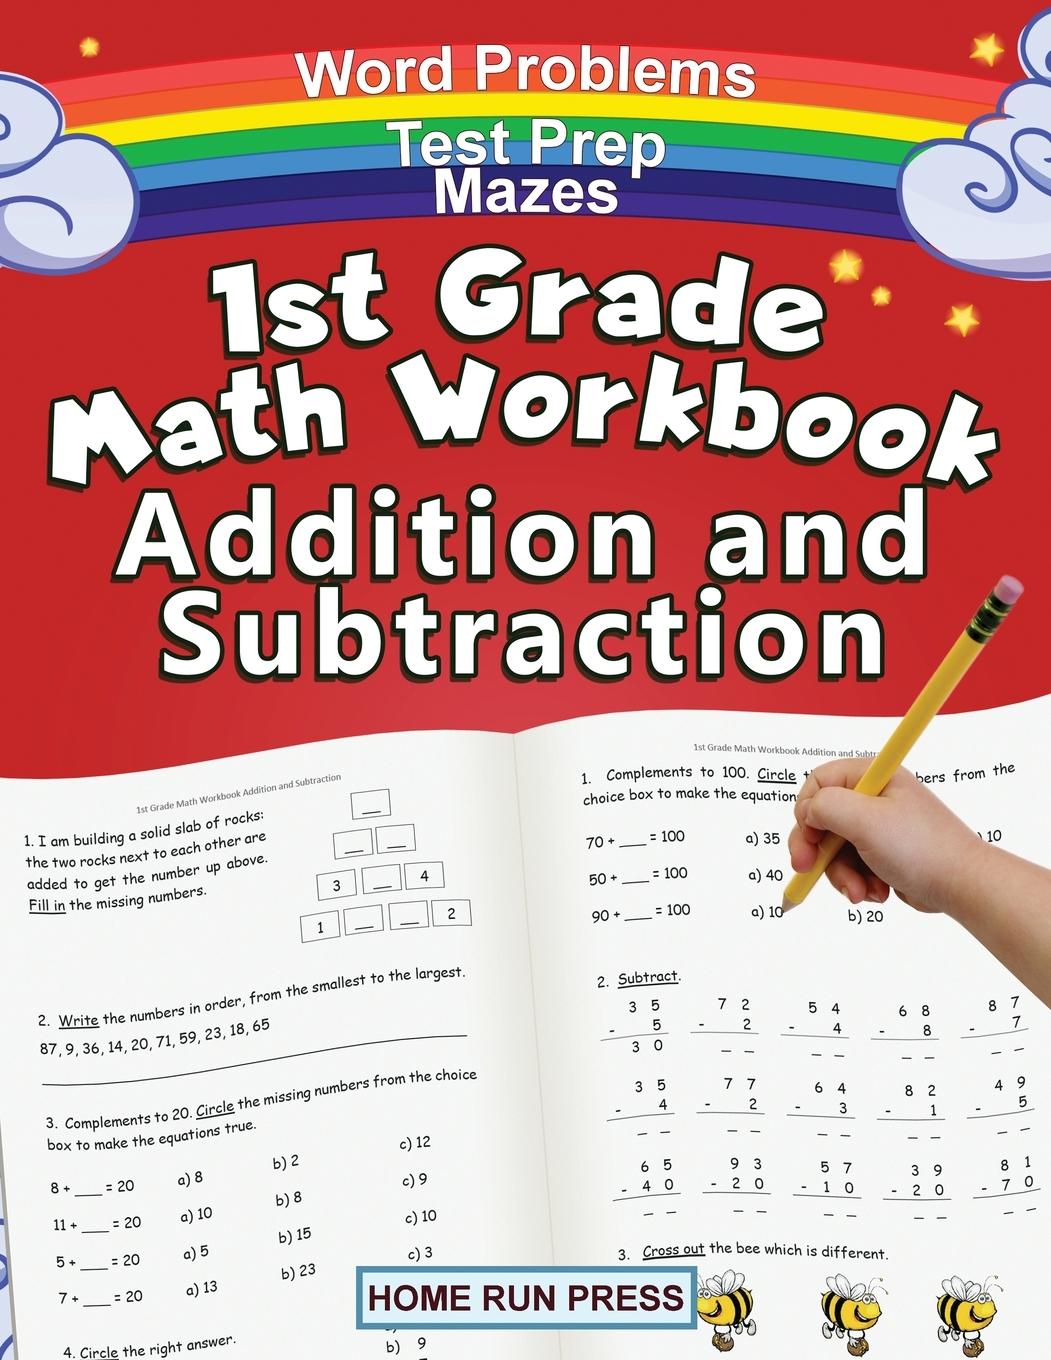 Book 1st Grade Math Workbook Addition and Subtraction Tbd